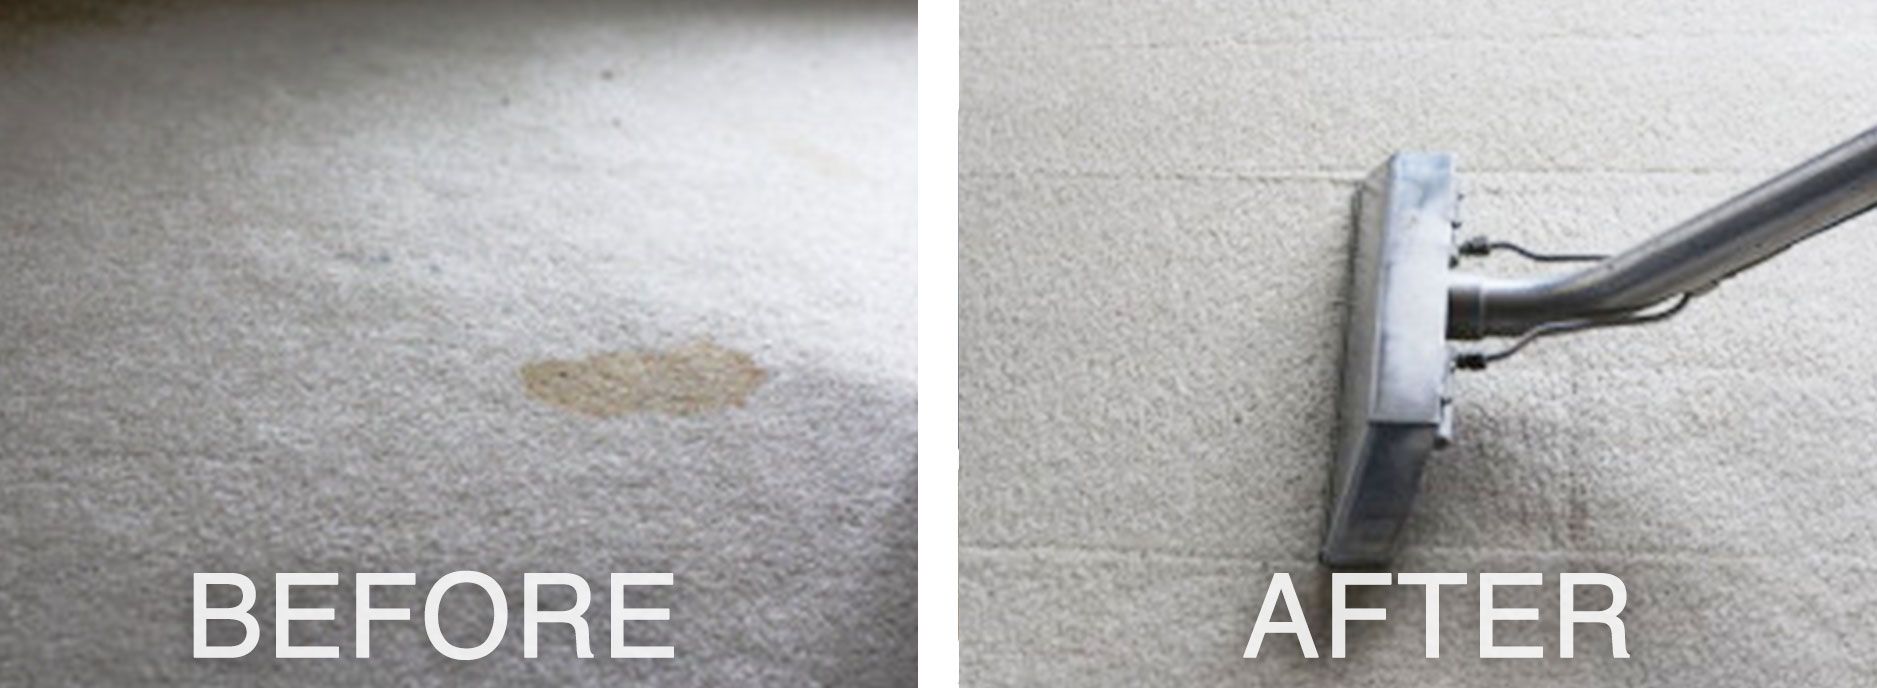 Before and after pet stain on the carpet